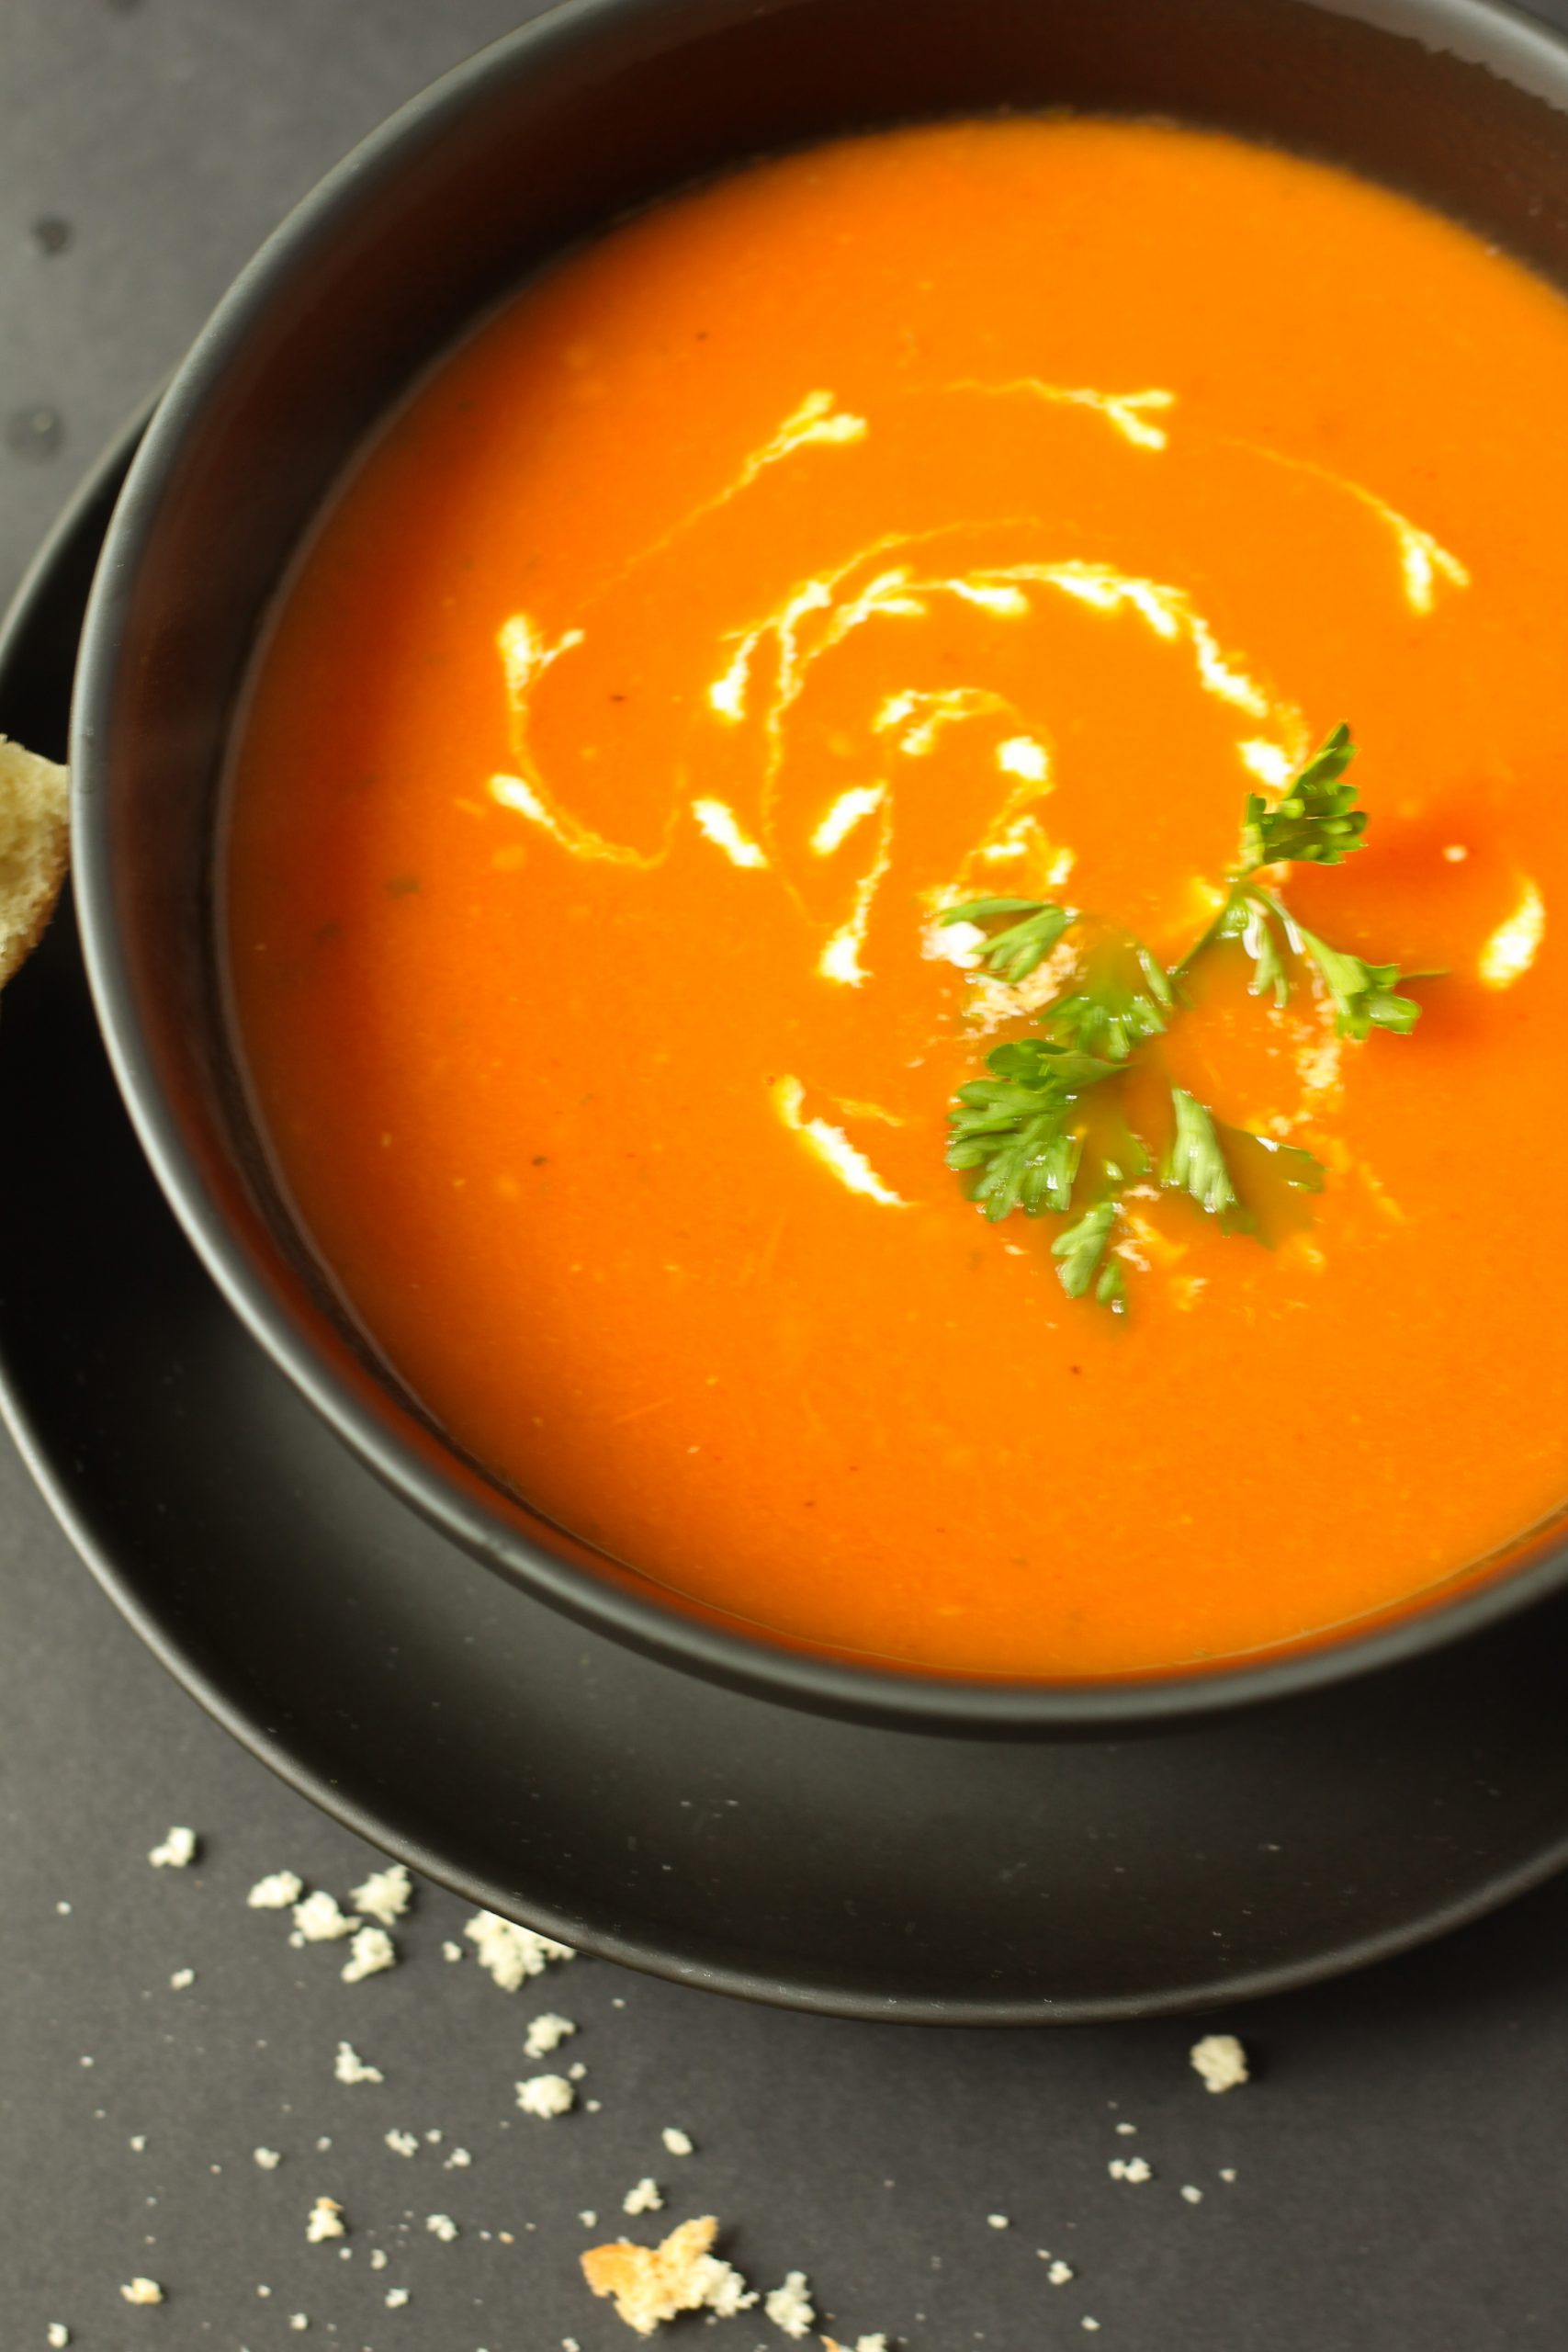 Tomato soup with garnish and heavy cream